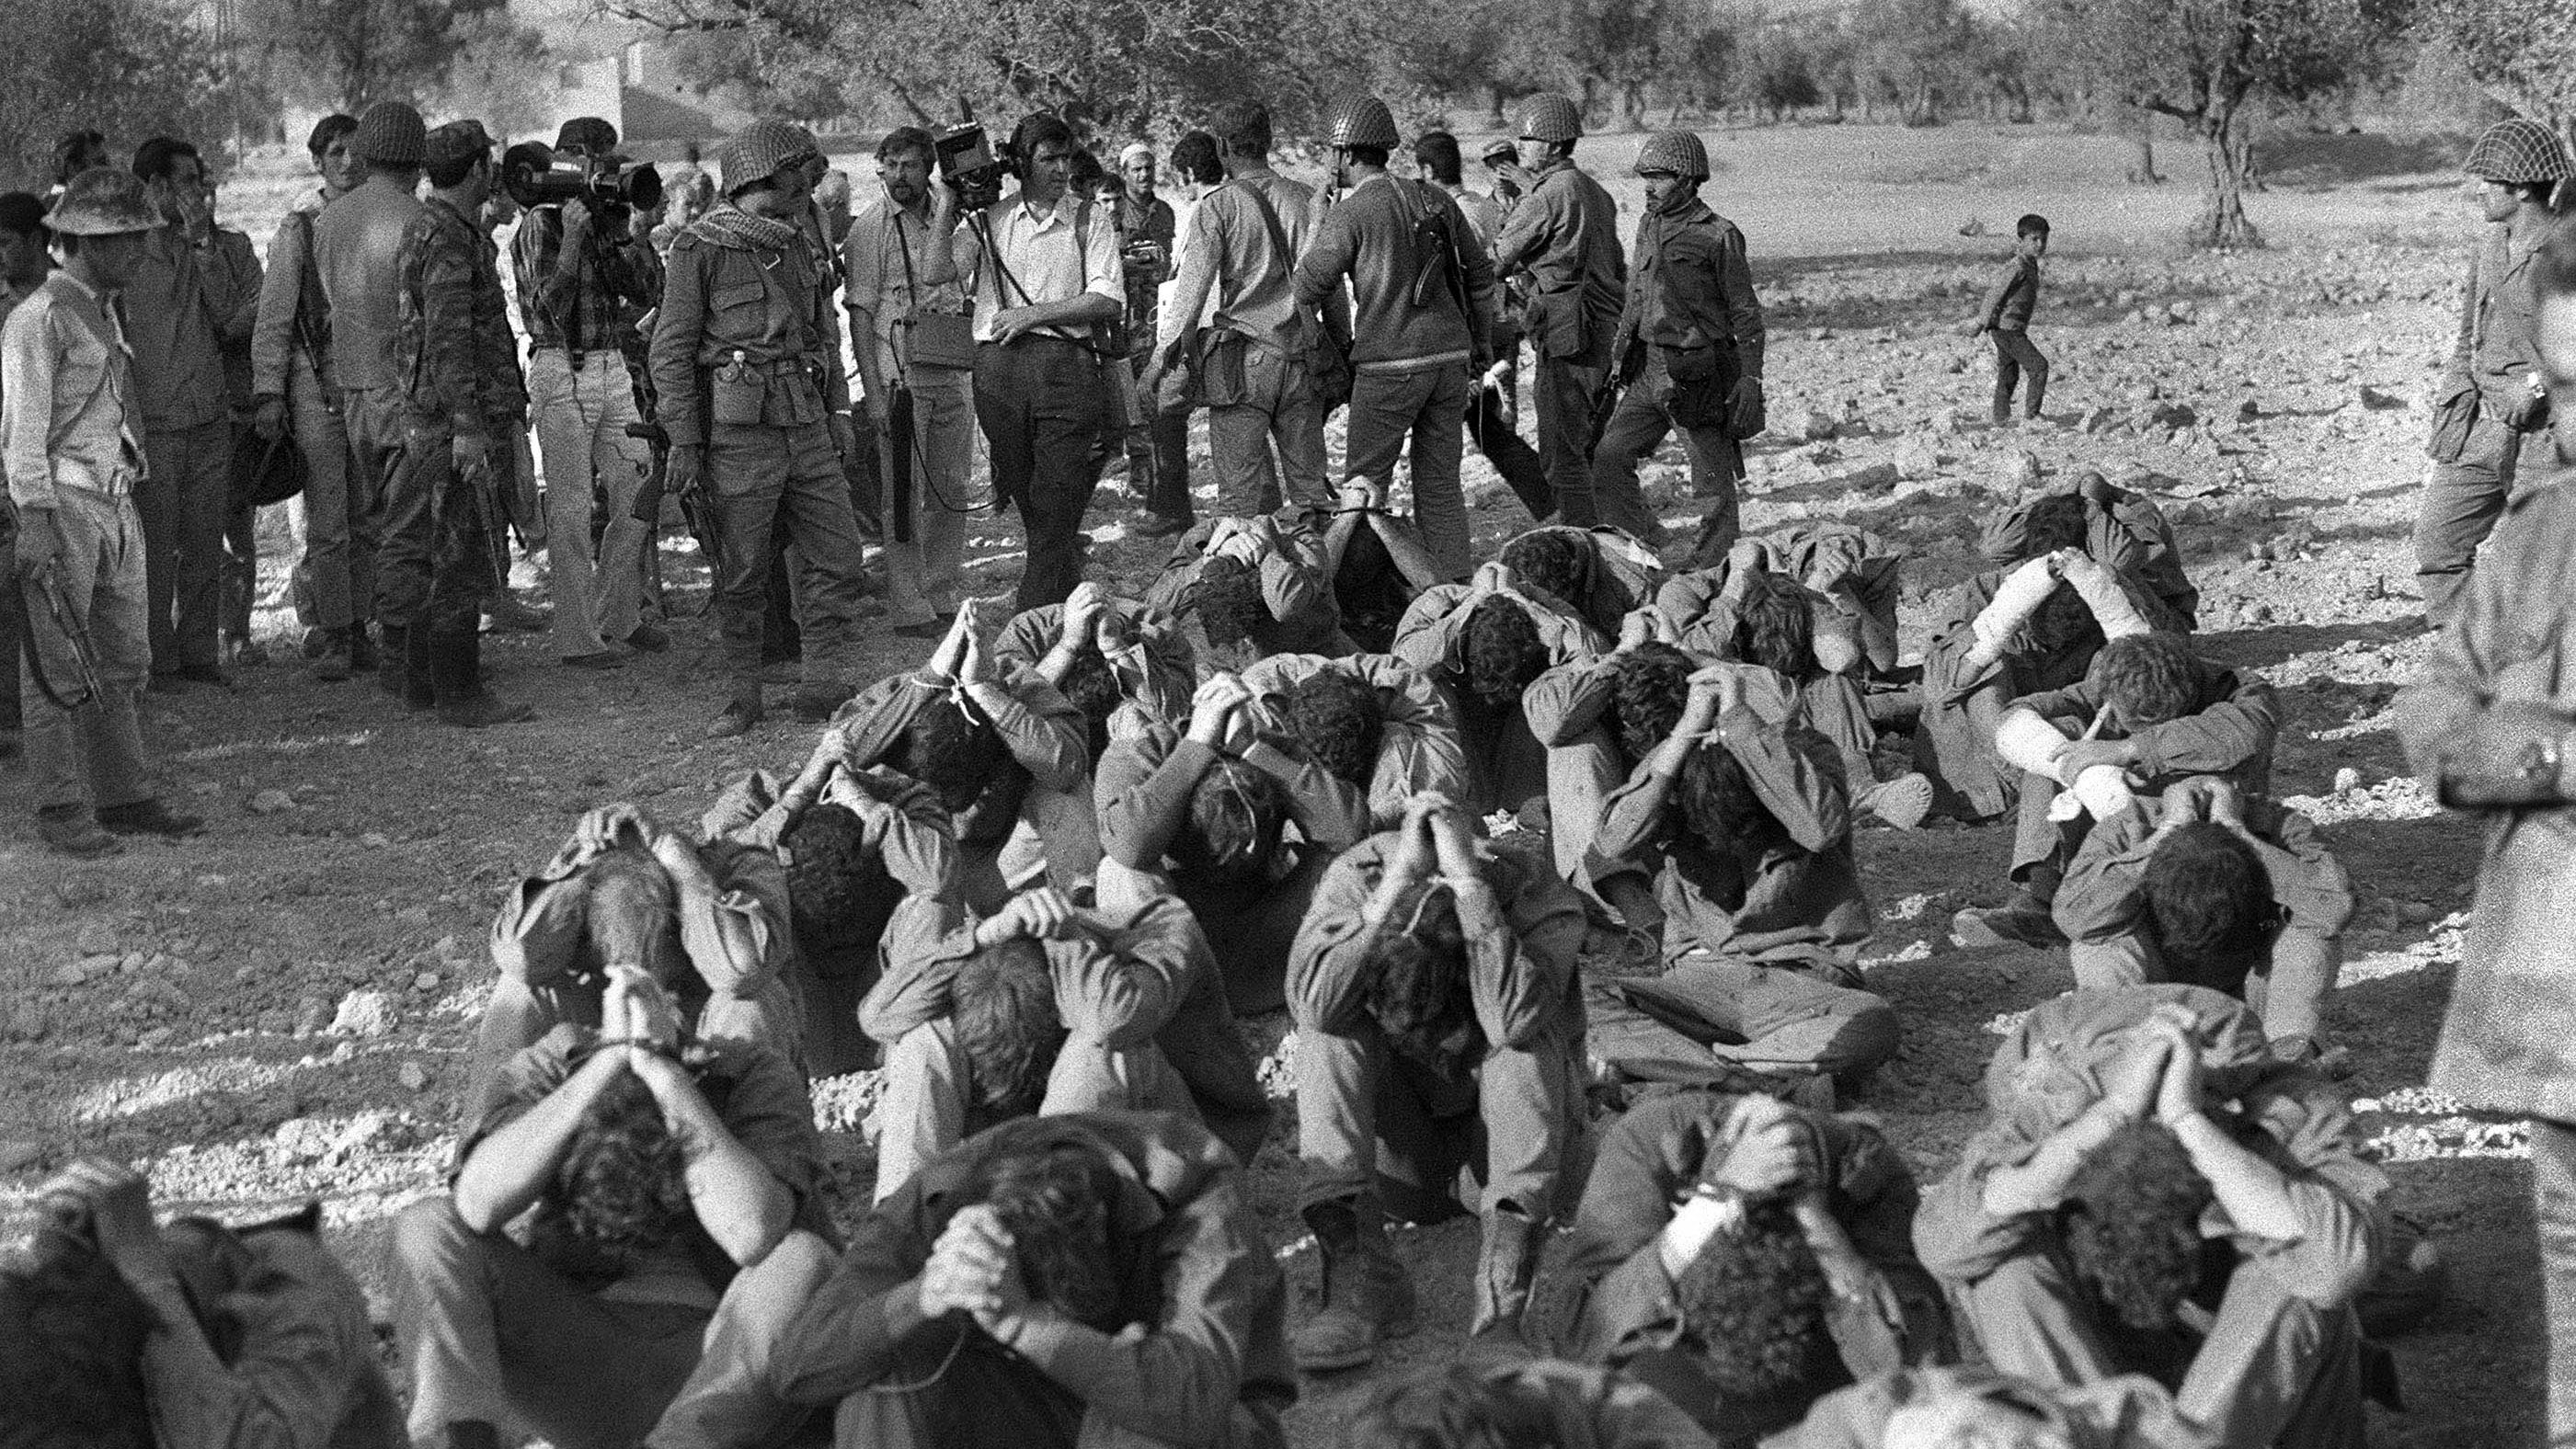 Israelis captured by Syrian troops during the Yom Kippur War are presented to the press on October 16, 1973.